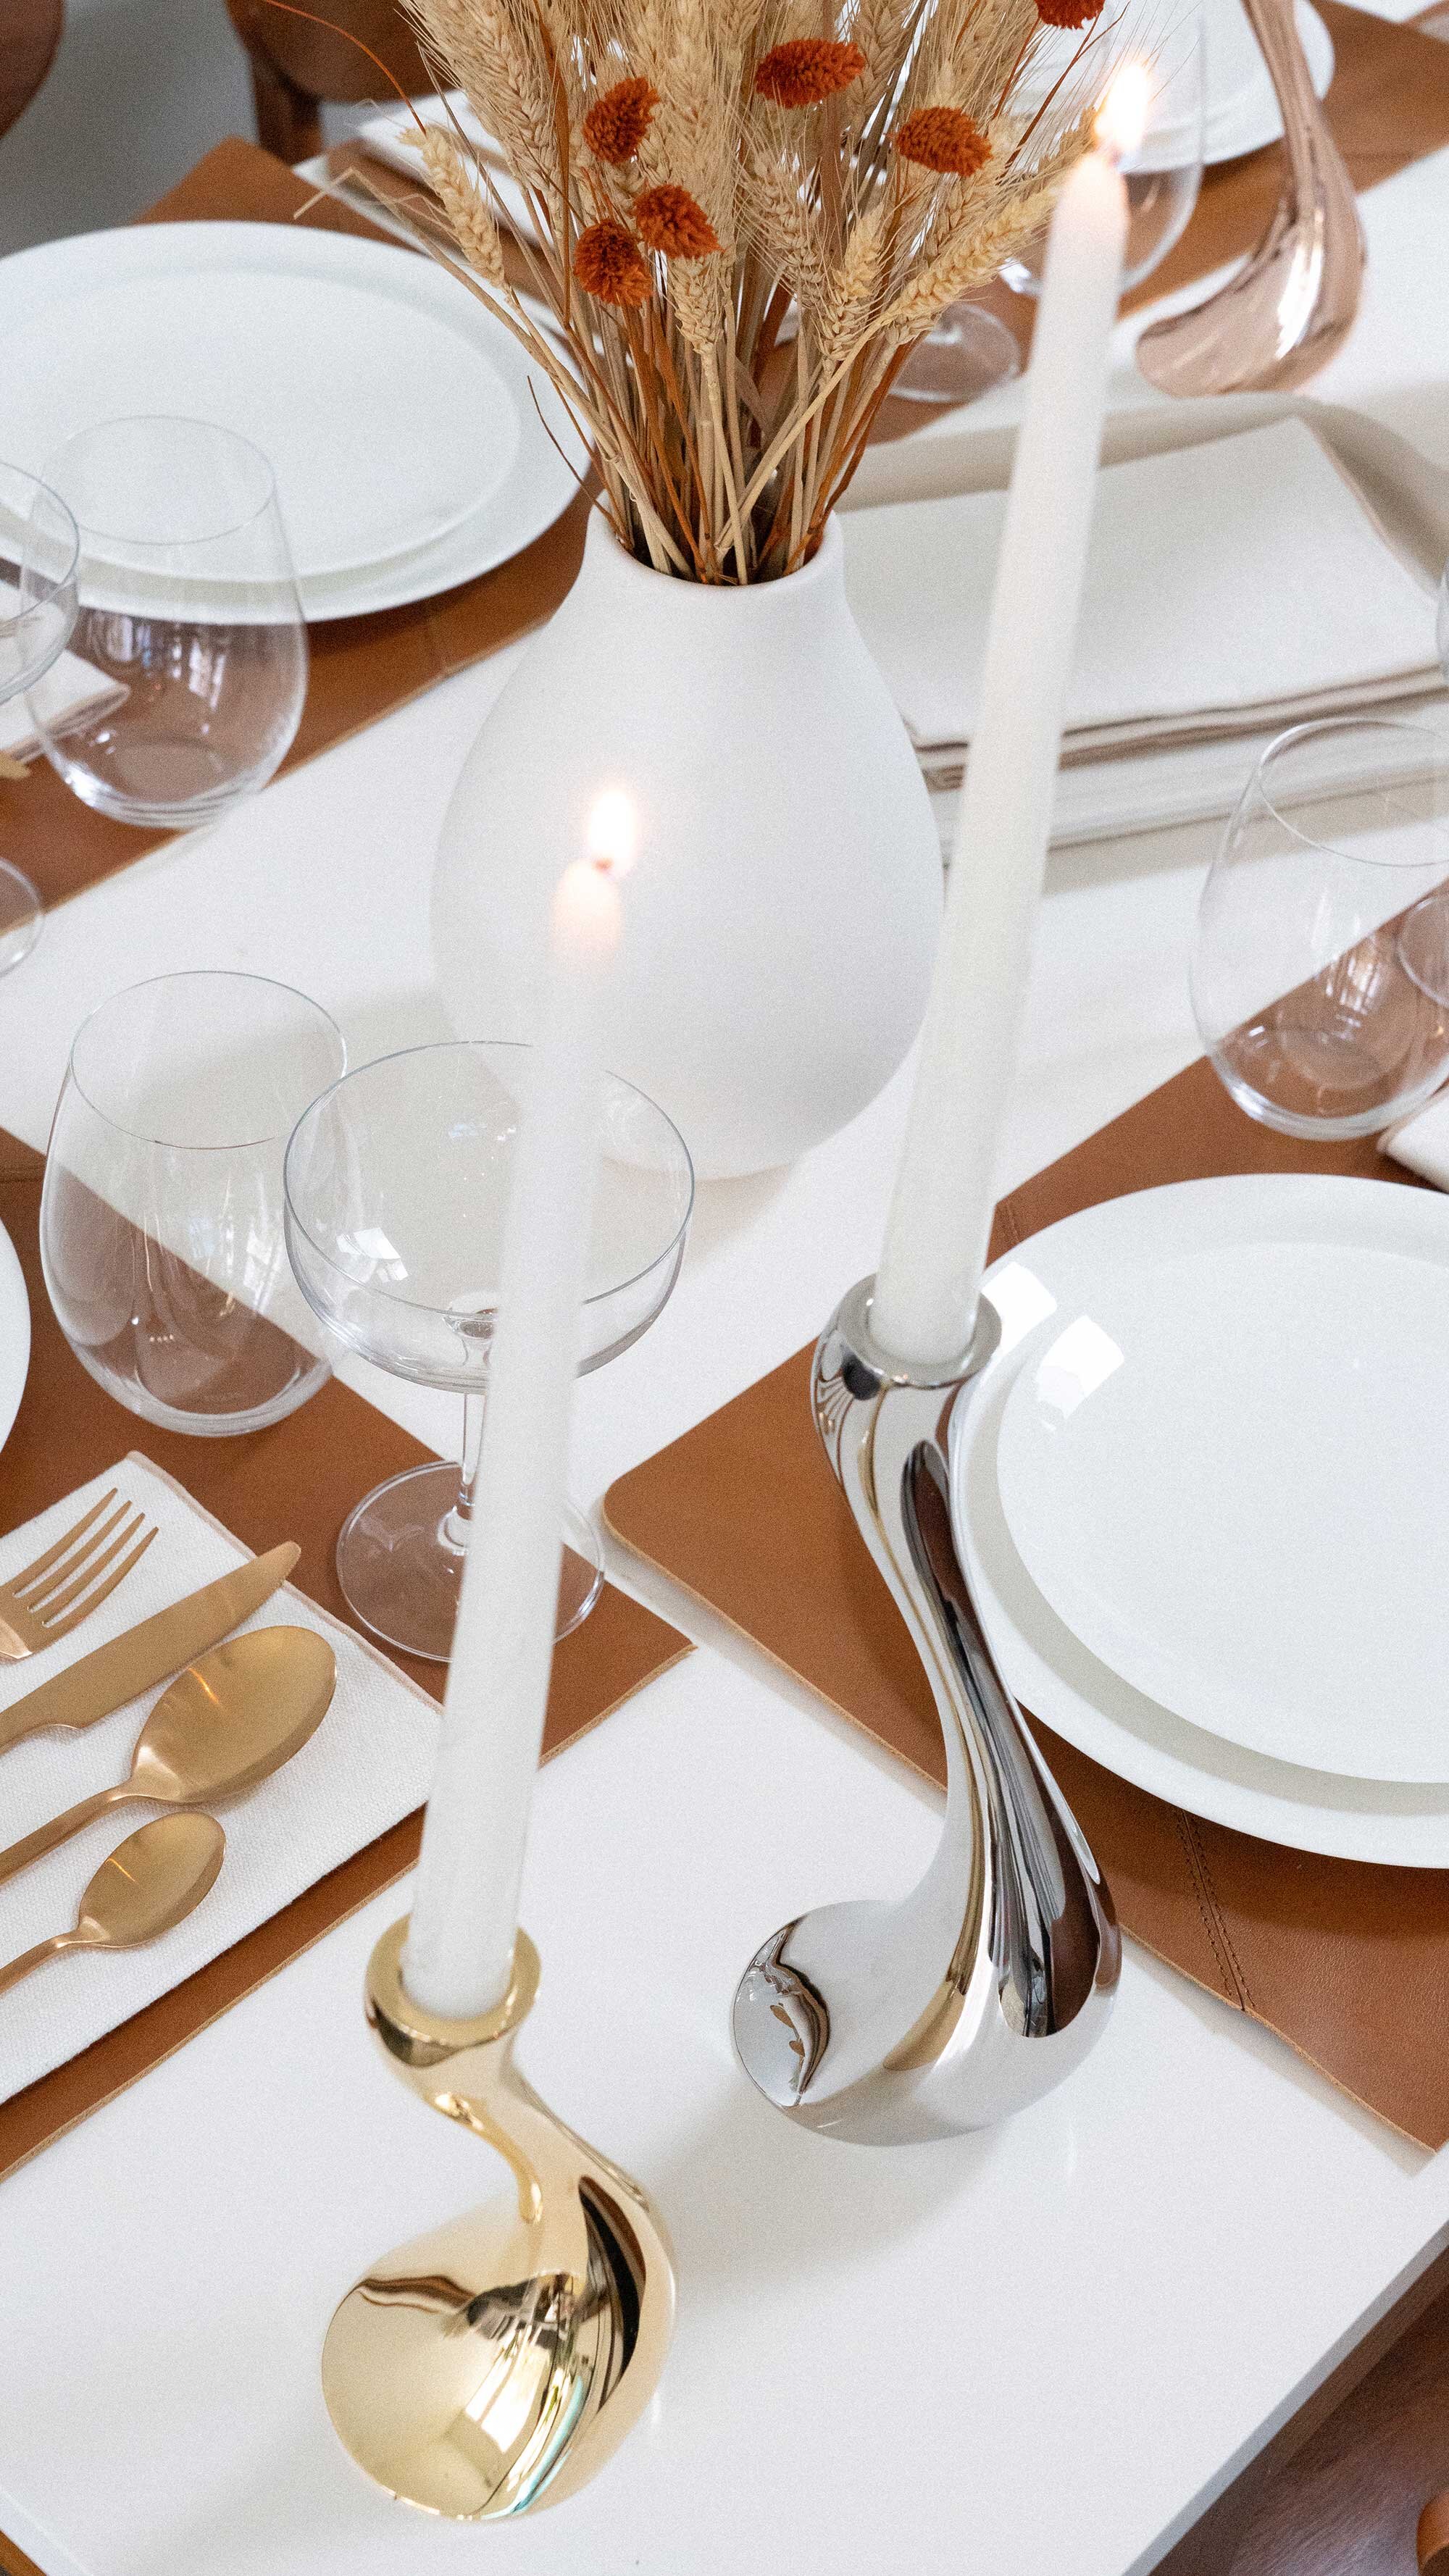 Thanksgiving table settings elegant gold. Sarah Butler of @sarahchristine Thanksgiving table settings featuring Georg Jensen Cobra Candleholder Set, tan leather placemats, and modern gold plated flatware with rustic dried flowers 3.jpg